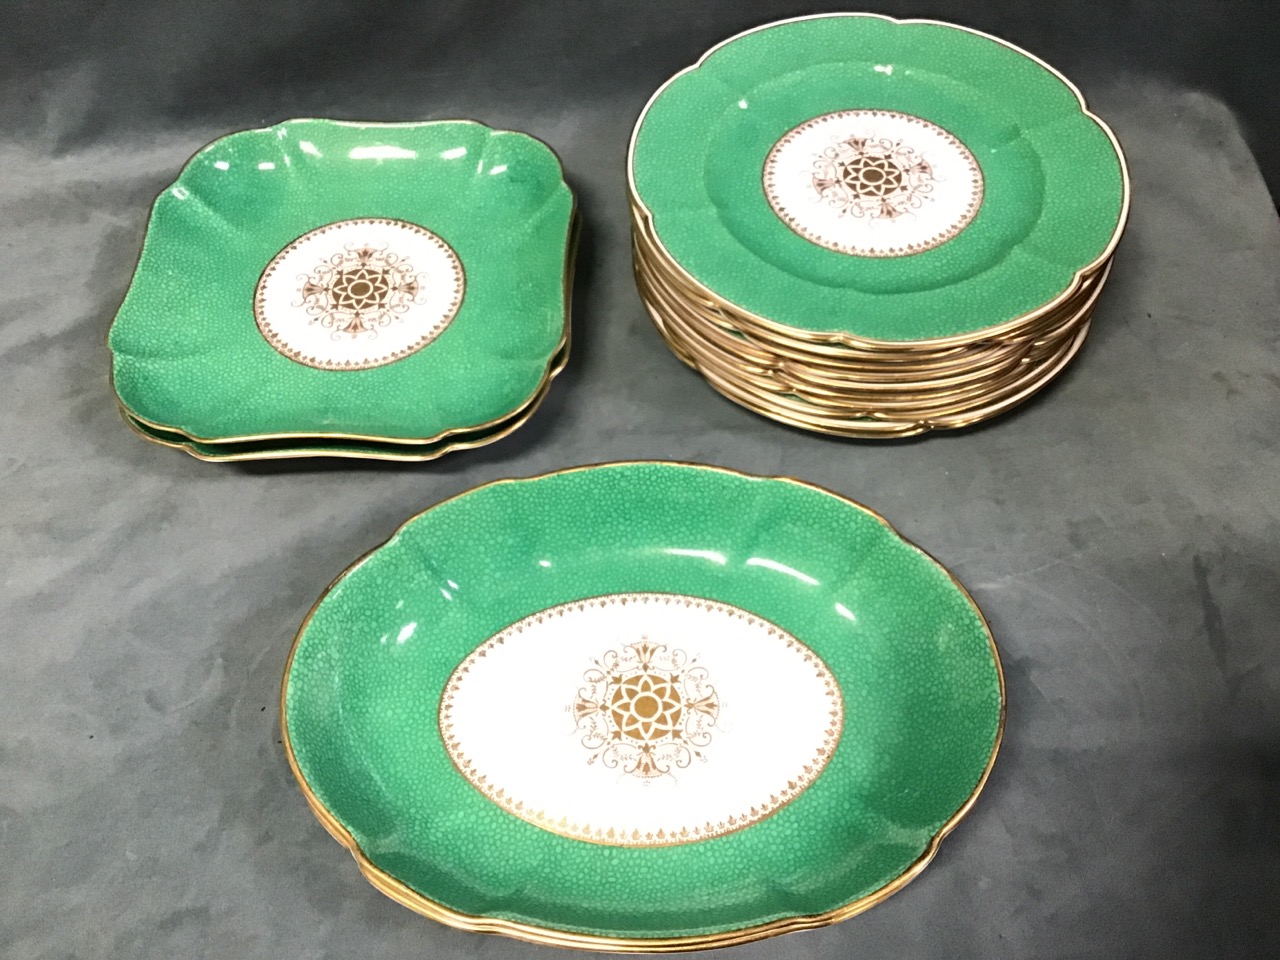 A Grosvenor China porcelain dessert service retailed by Thomas Goode & Co, decorated with gilt - Image 3 of 3